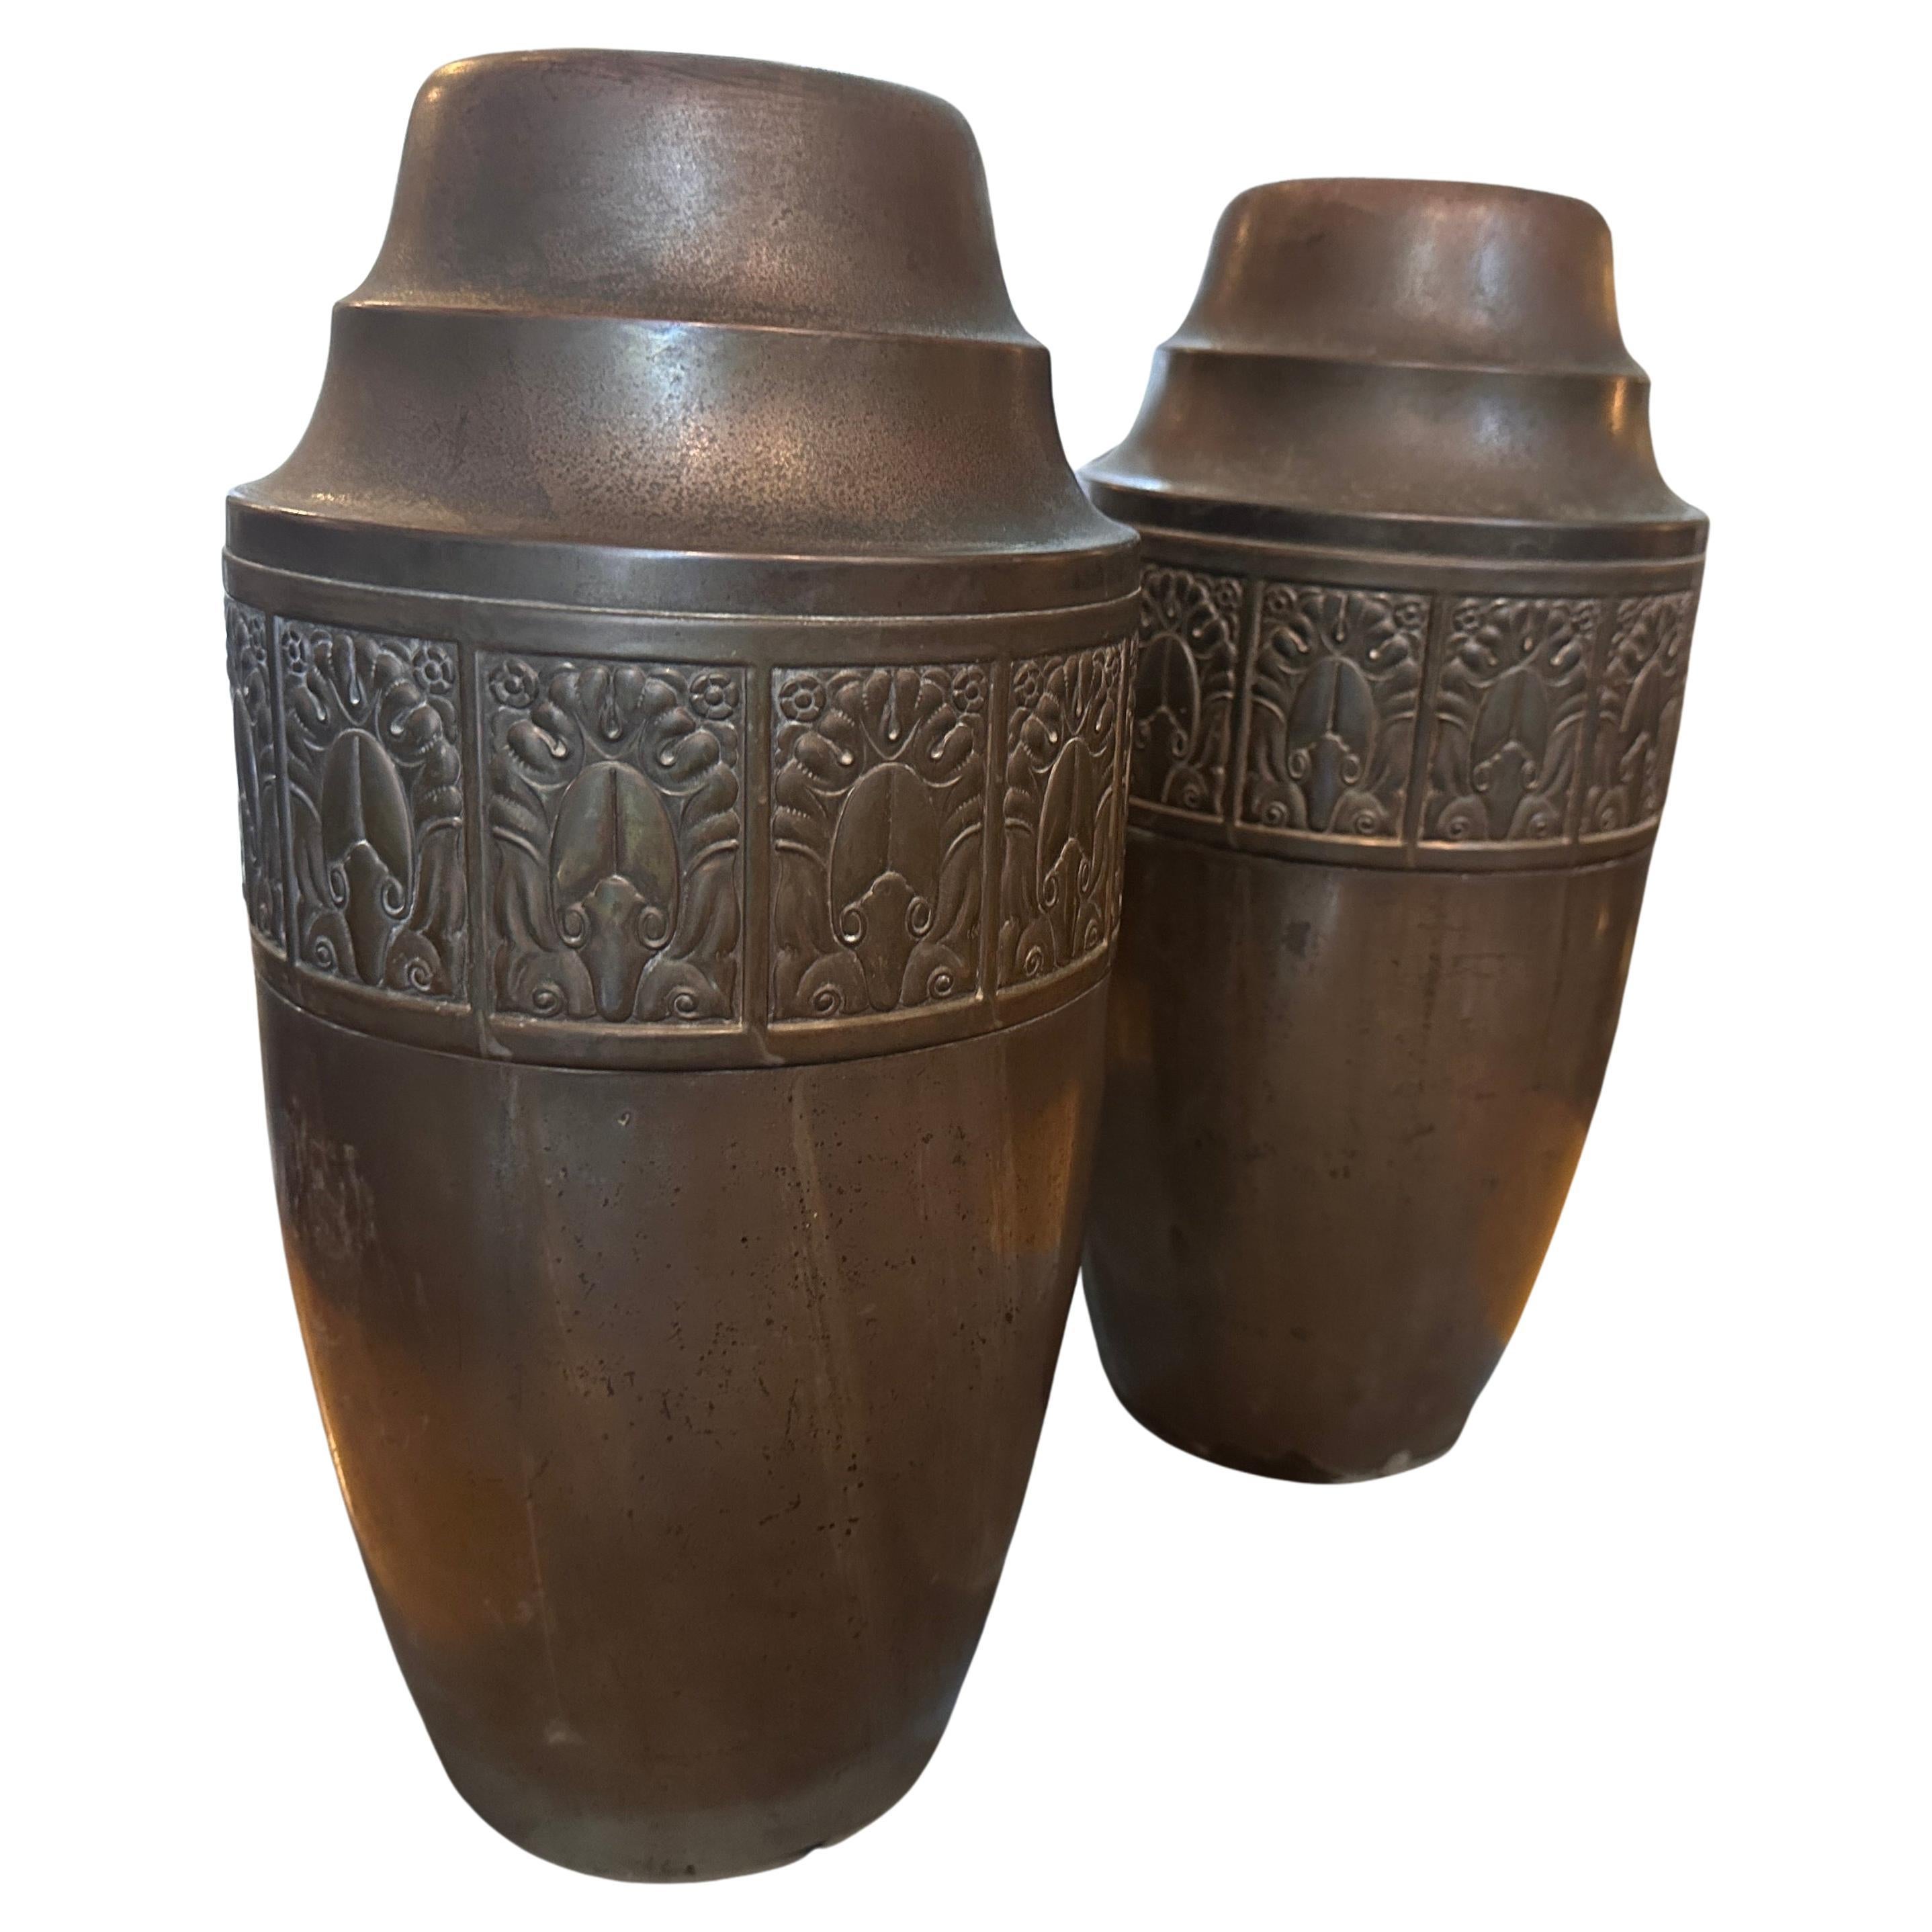 This set of two 1930s Art Deco copper Italian vases it's an exquisite example of the Art Deco design movement that flourished in the early 20th century.  These vases are crafted from copper, a popular material choice during the Art Deco period.